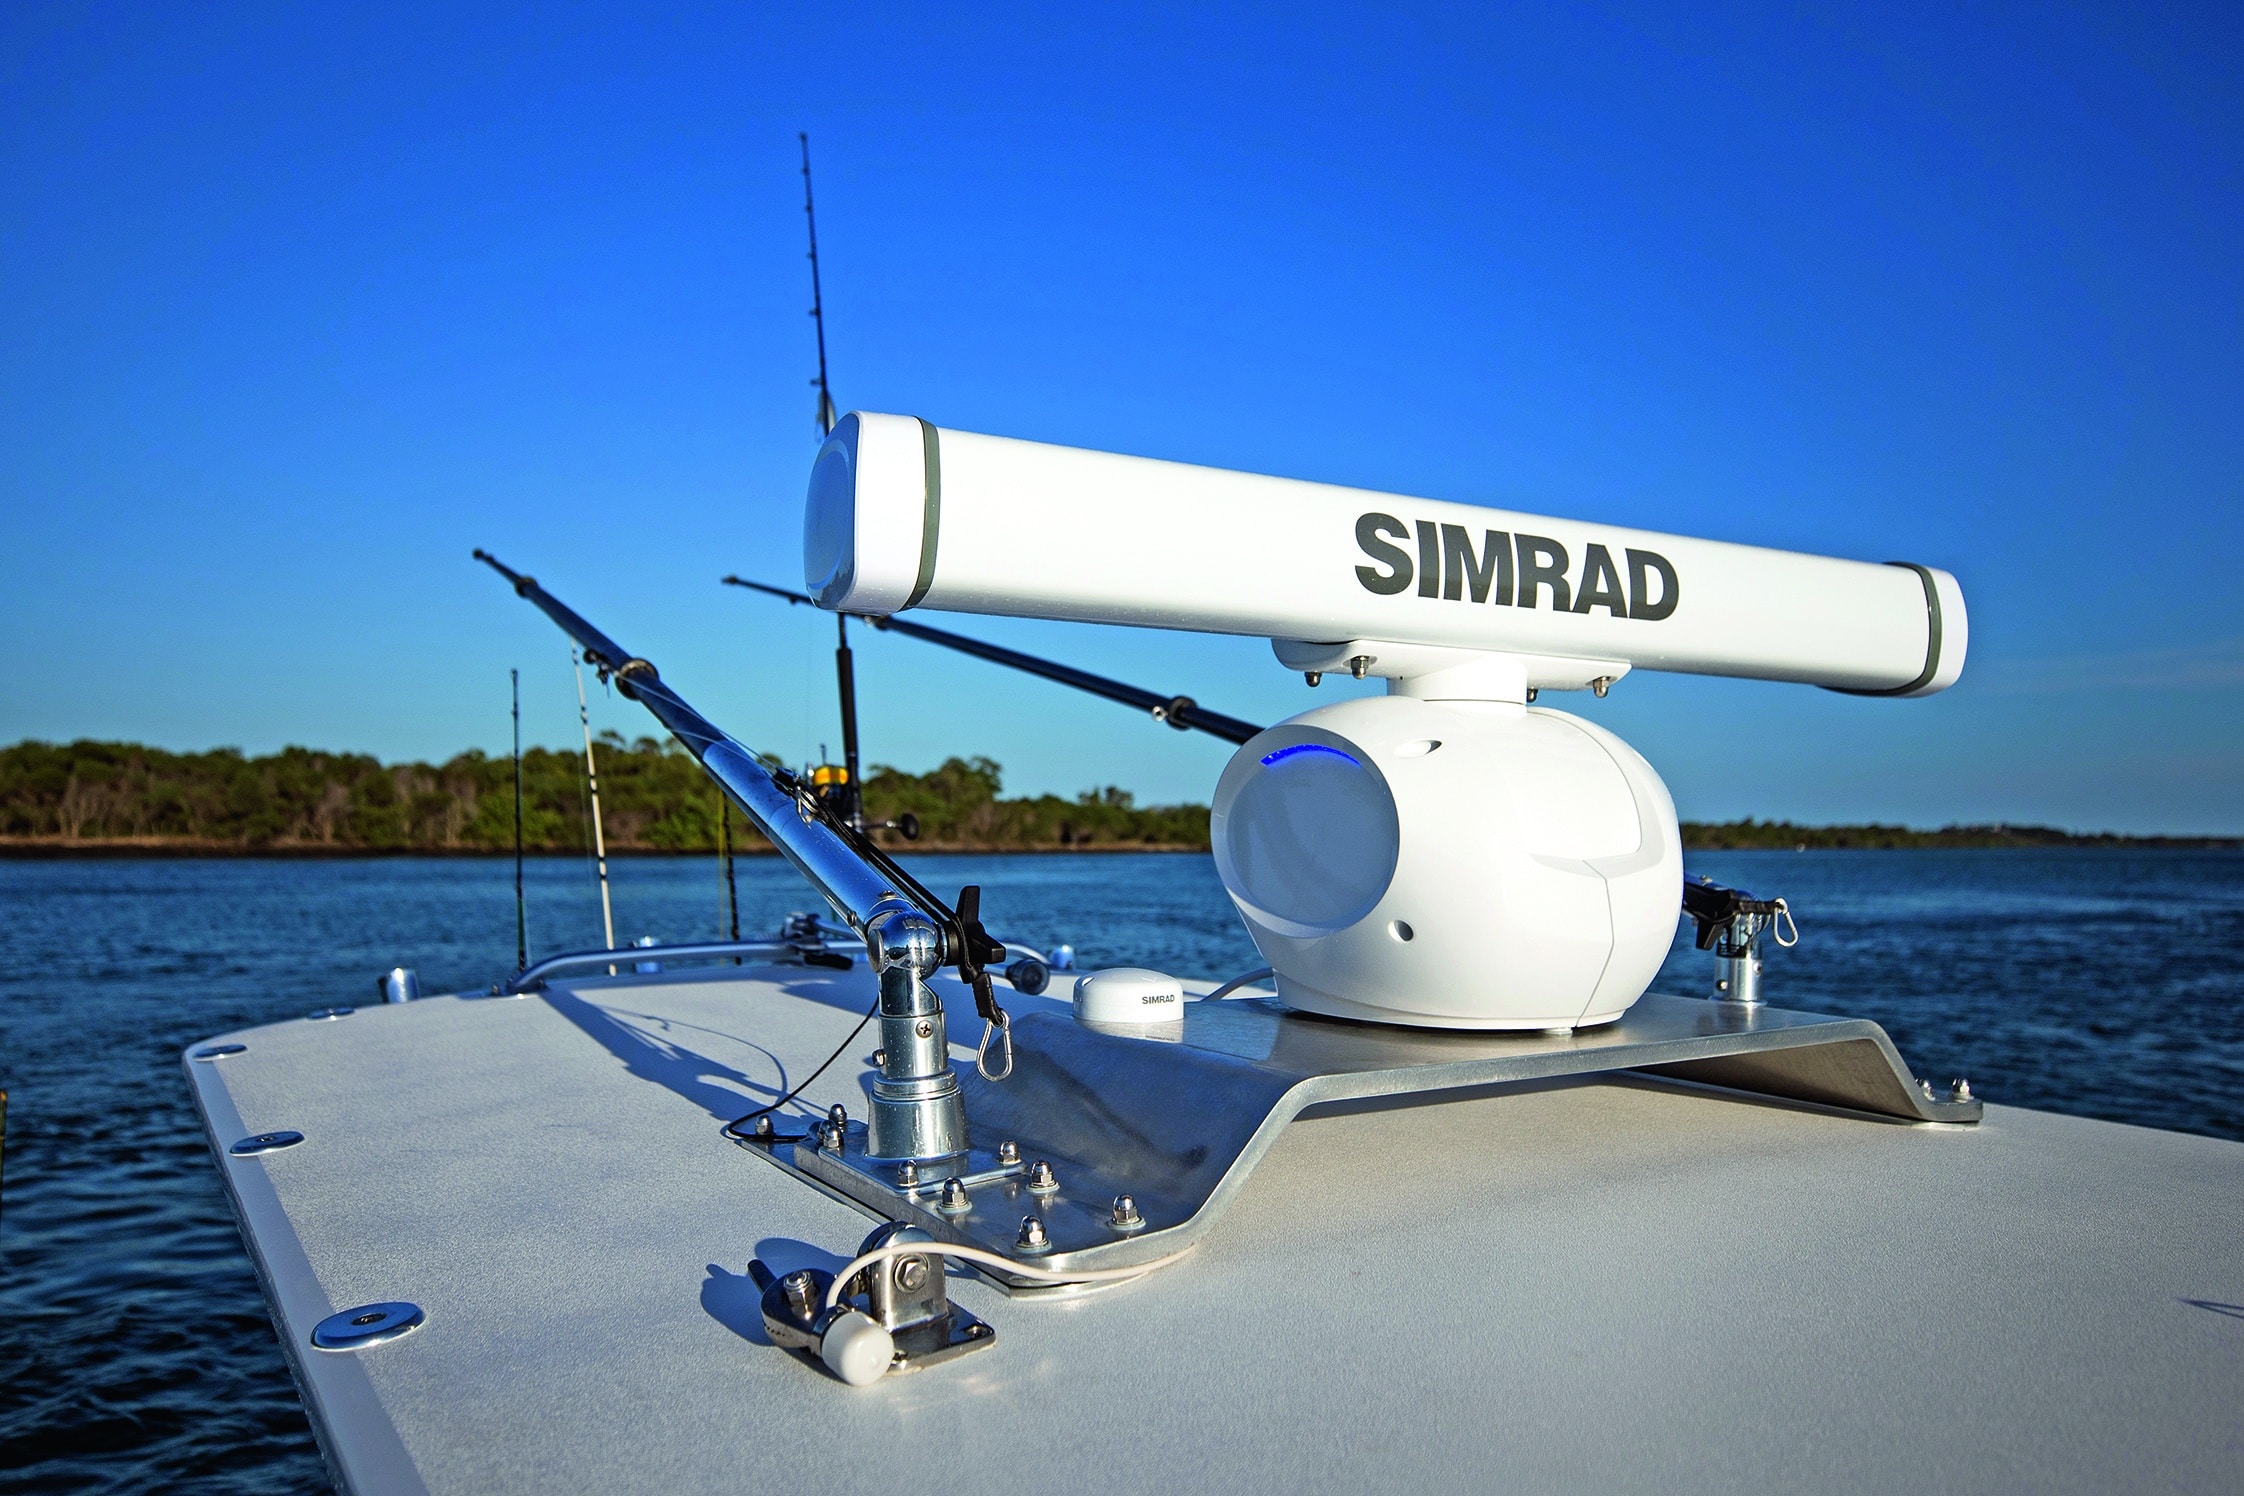 Simrad HALO Radar - These open arrays are not the behemoths that earlier open systems were.